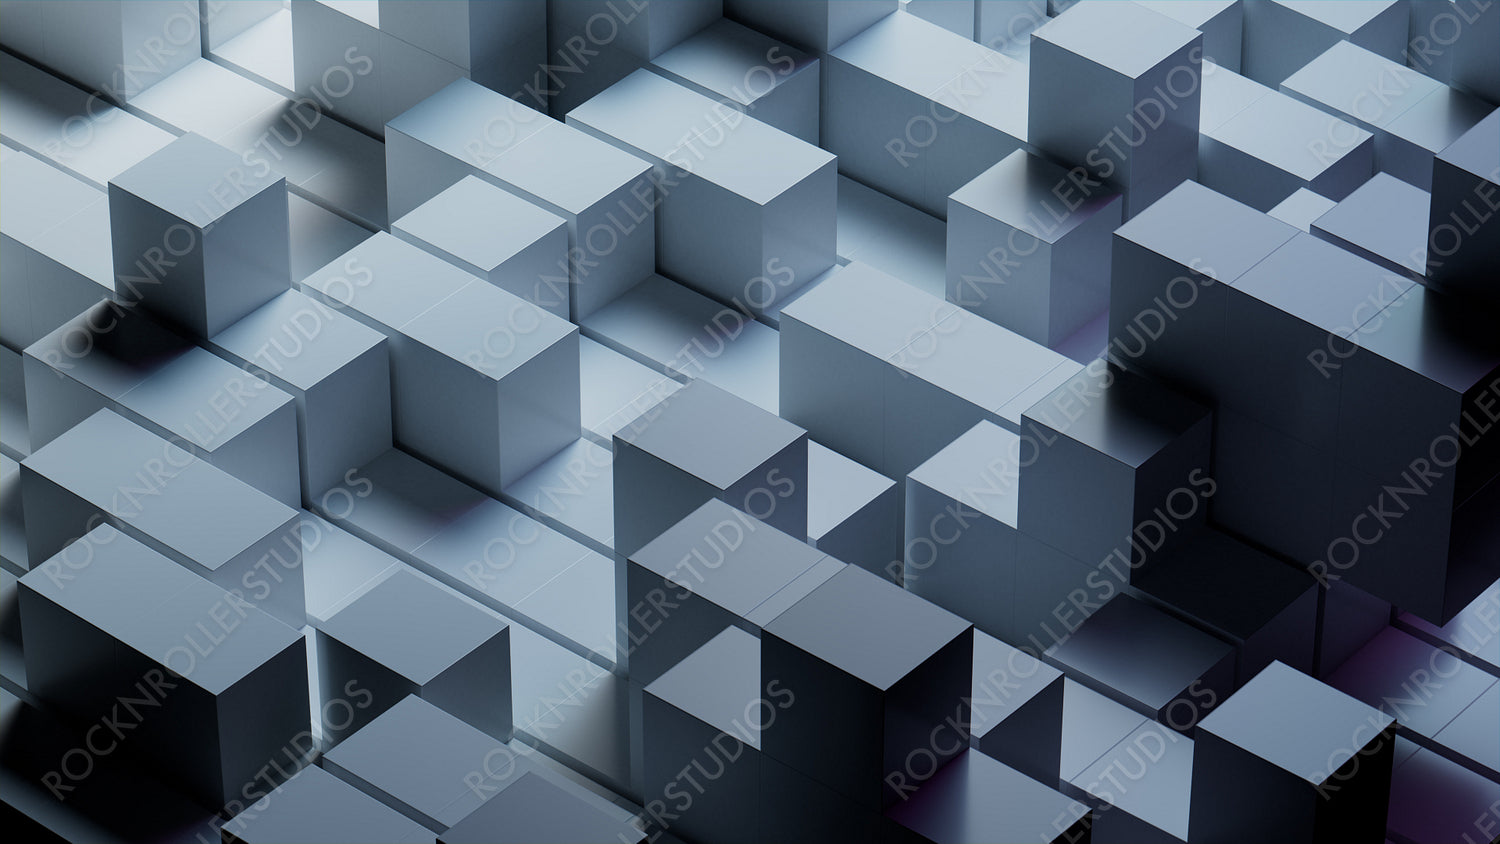 Contemporary Tech Background with Neatly Arranged Glossy Blocks. Grey, 3D Render.